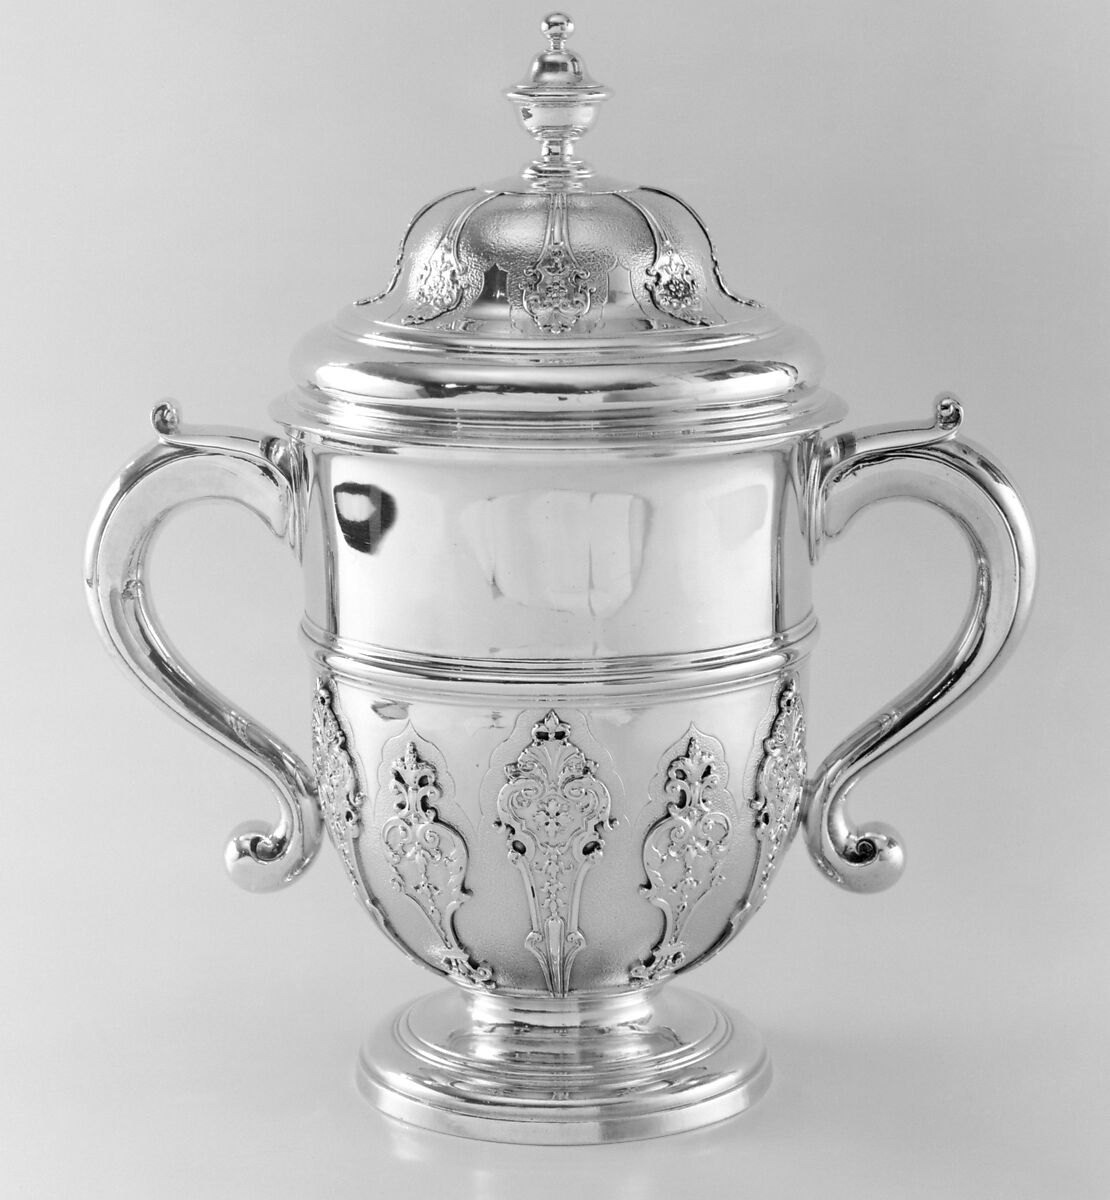 Two-handled cup with cover, Augustin Courtauld (British, 1685–1751), Silver, parcel gilt, British, London 